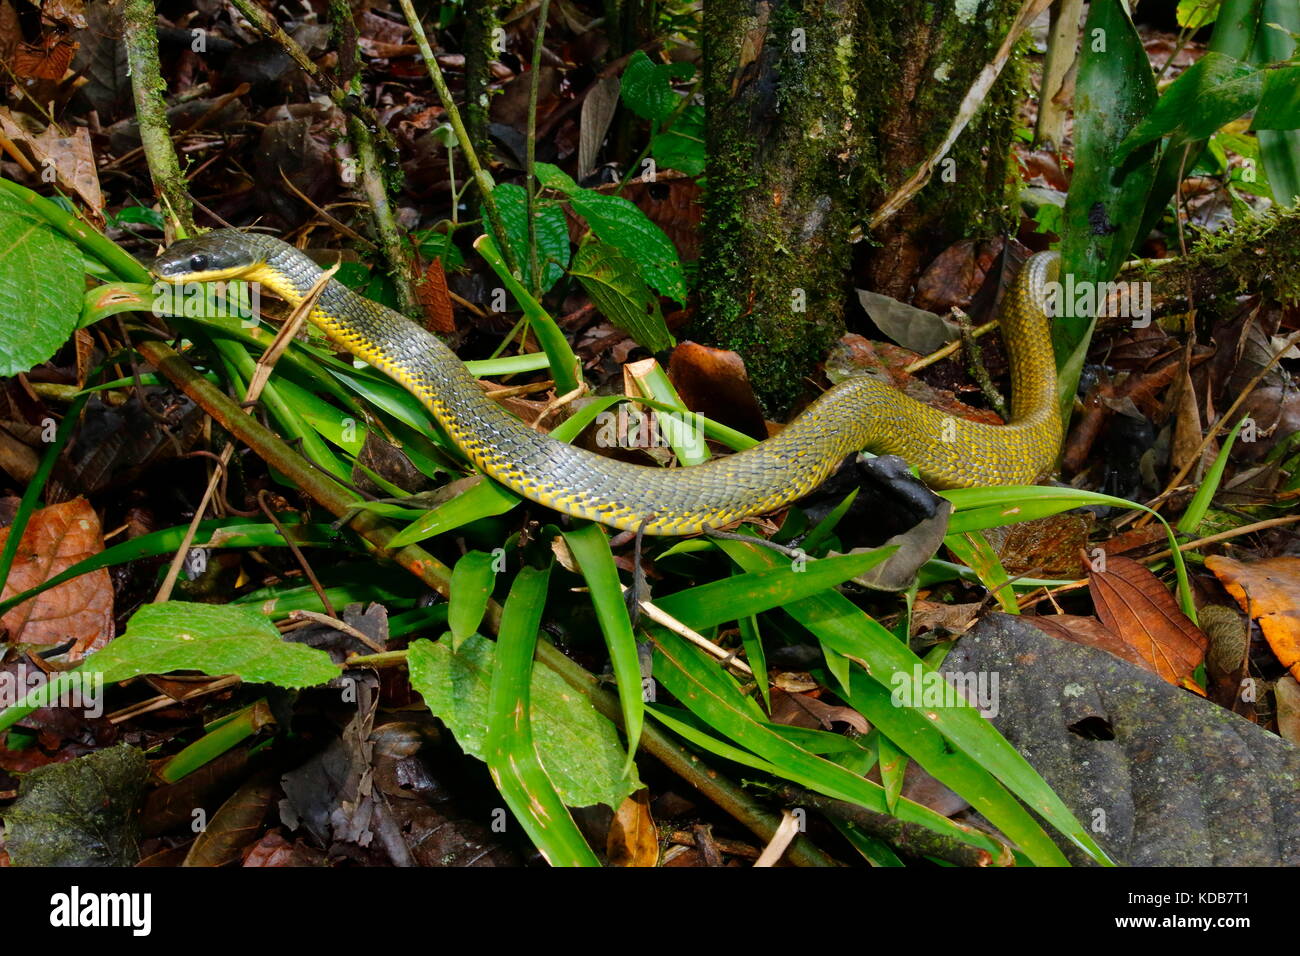 A puffing snake, Phrynonax poecilonotus, foraging on the forest floor. Stock Photo